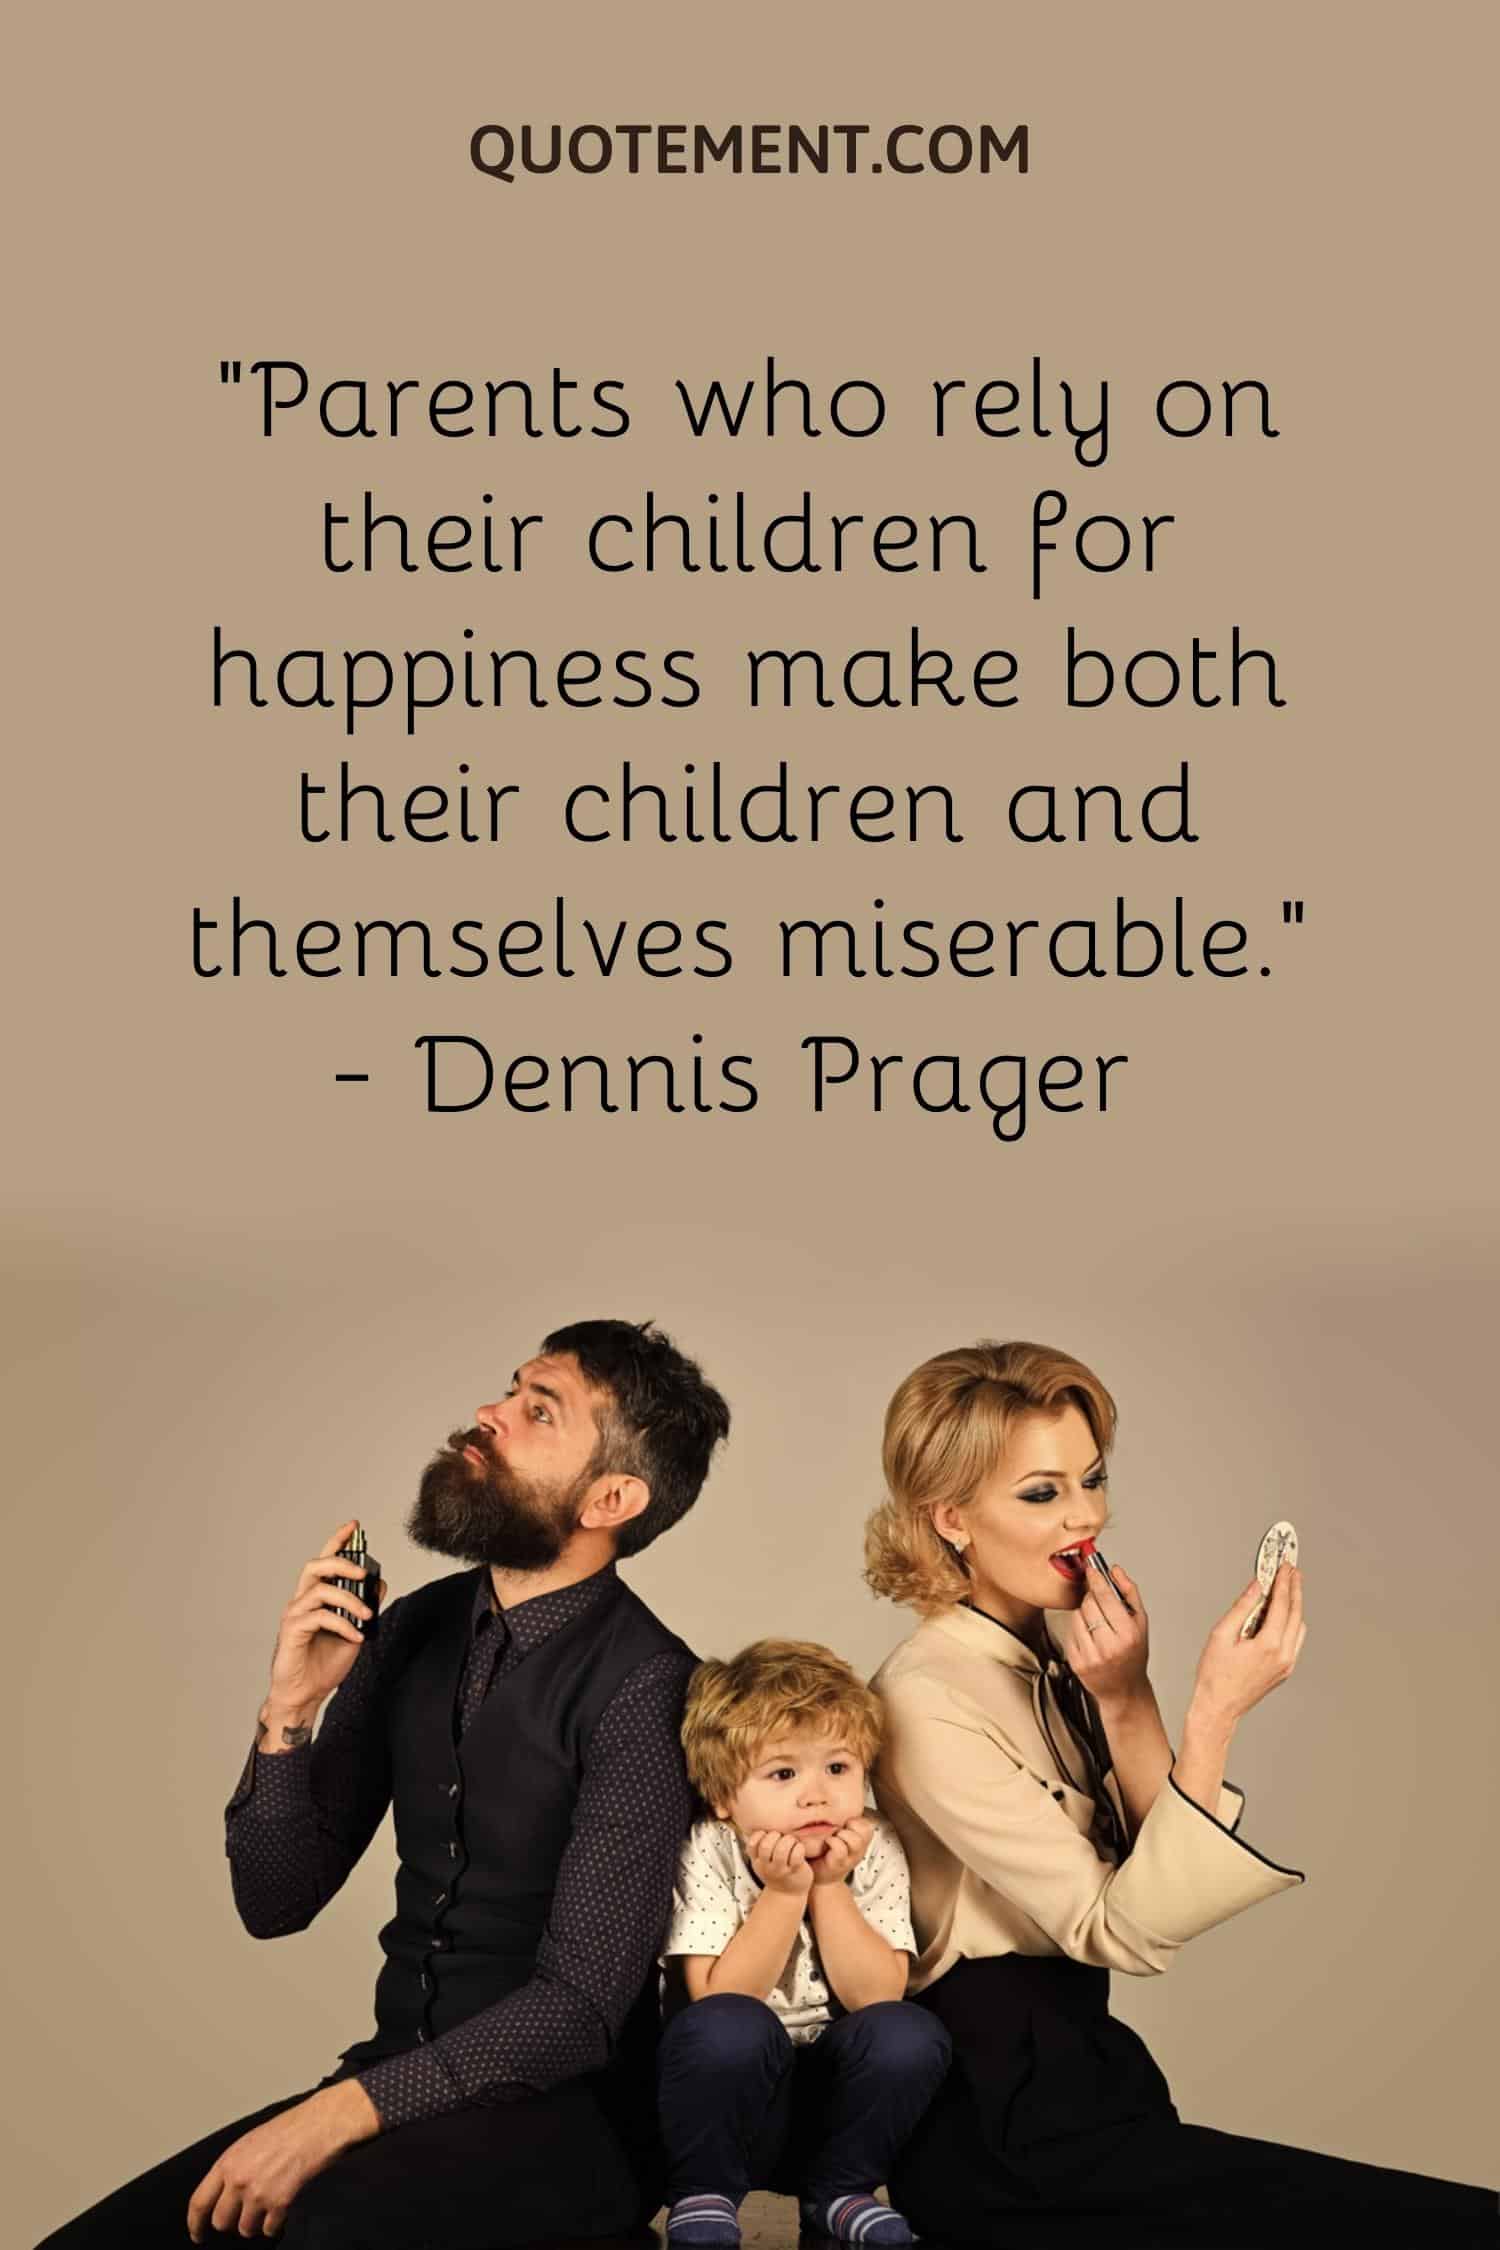 Parents who rely on their children for happiness make both their children and themselves miserable